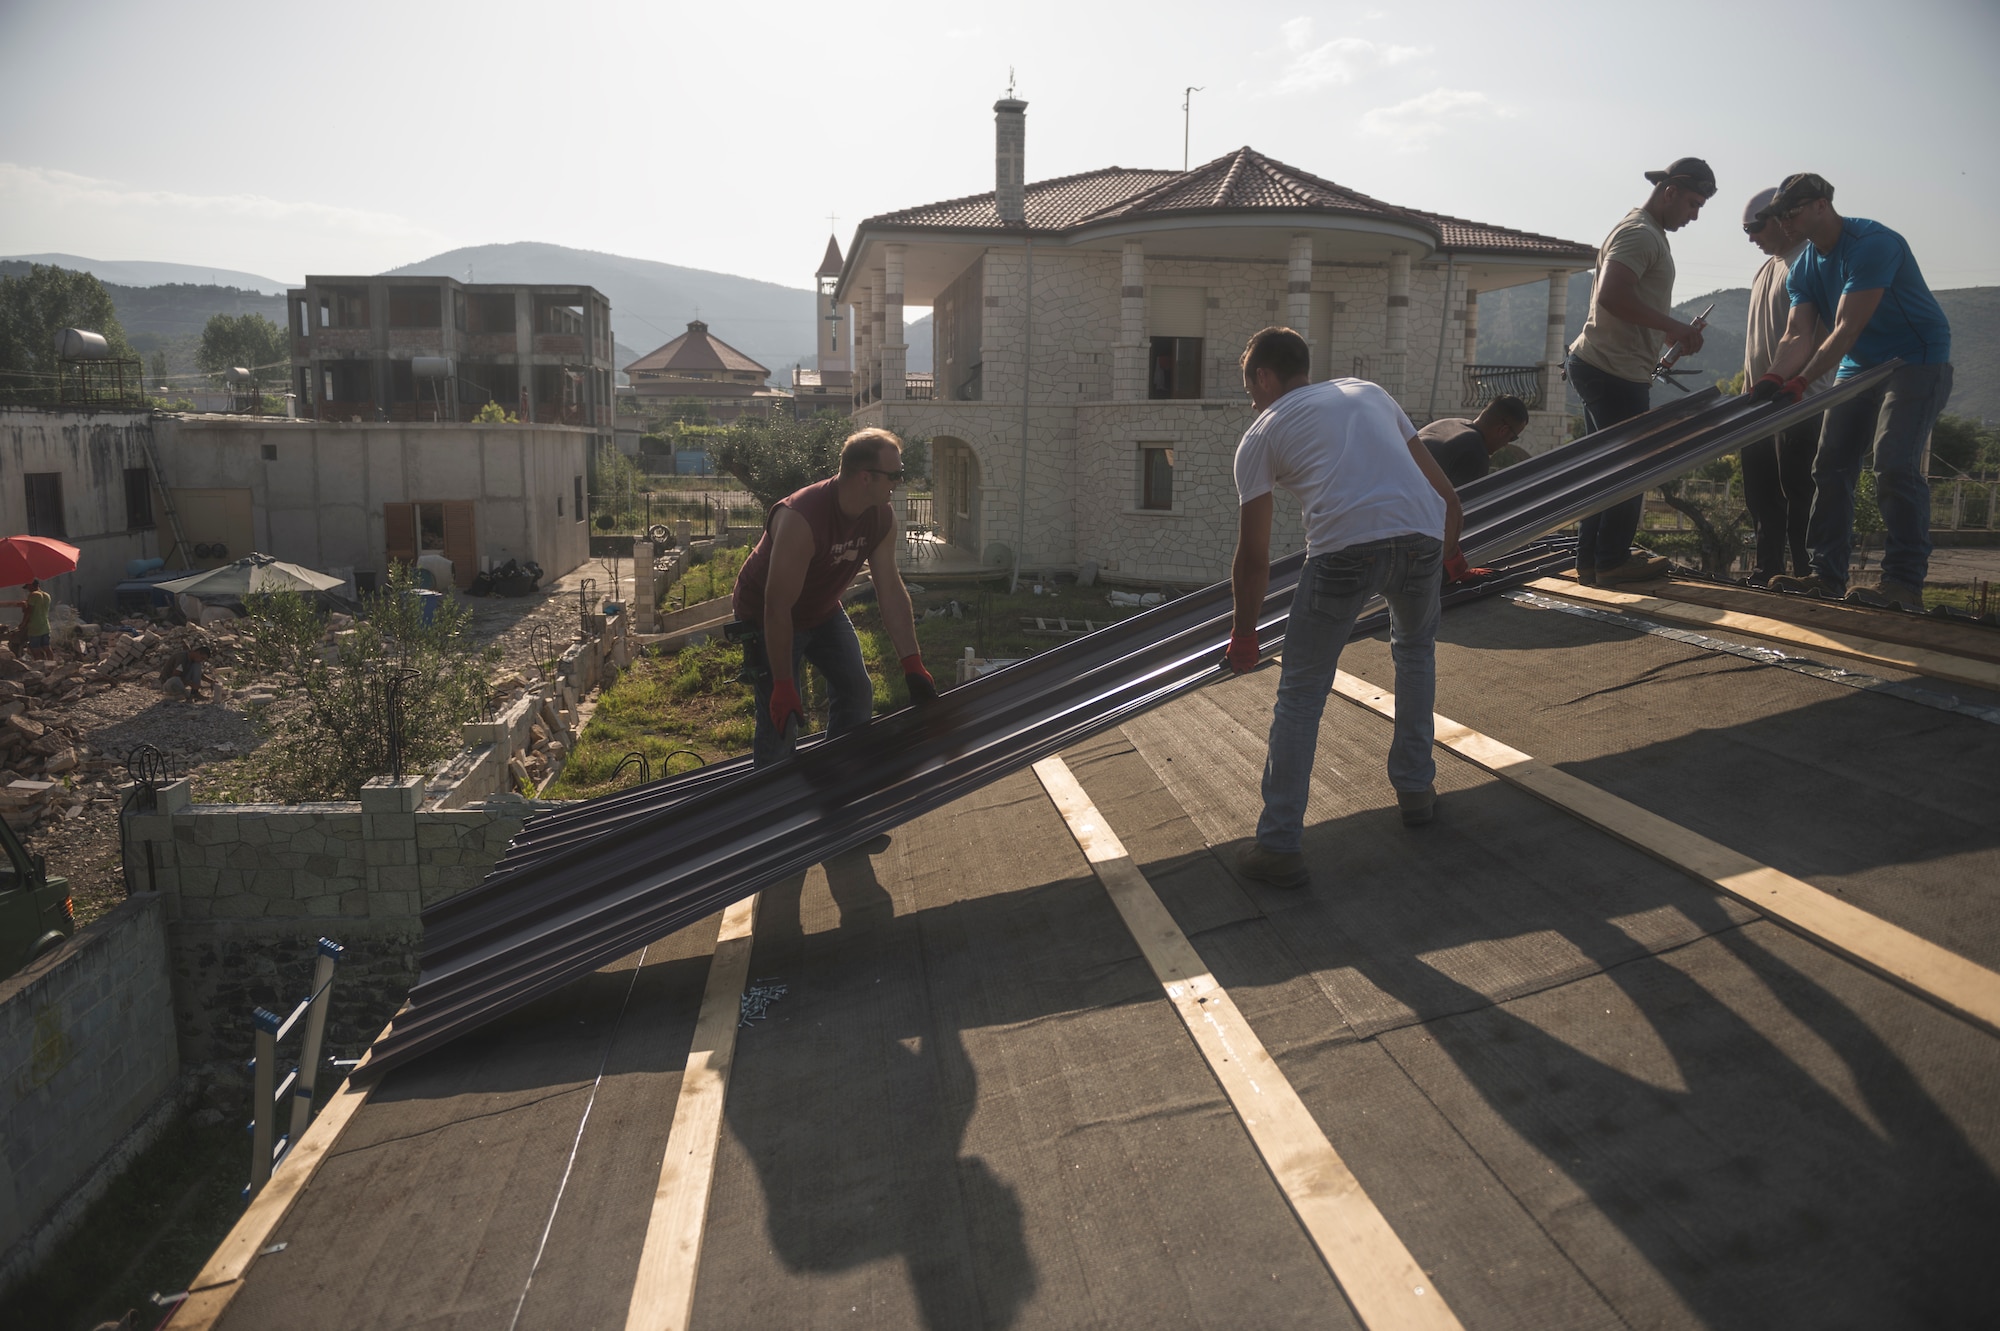 Airmen from the 107th Civil Engineer Squadron, Niagara Falls Air Reserve Station, N.Y., install a new roof on the clinic in Vau Dejes, Albania, June 18-July 2, 2016. The Airmen did such renovations as replacing walls, windows, doors and installing a 5,000 liter water tank as part of a Deployment For Training. (U.S. Air Force Photo by Staff Sgt. Ryan Campbell/released)